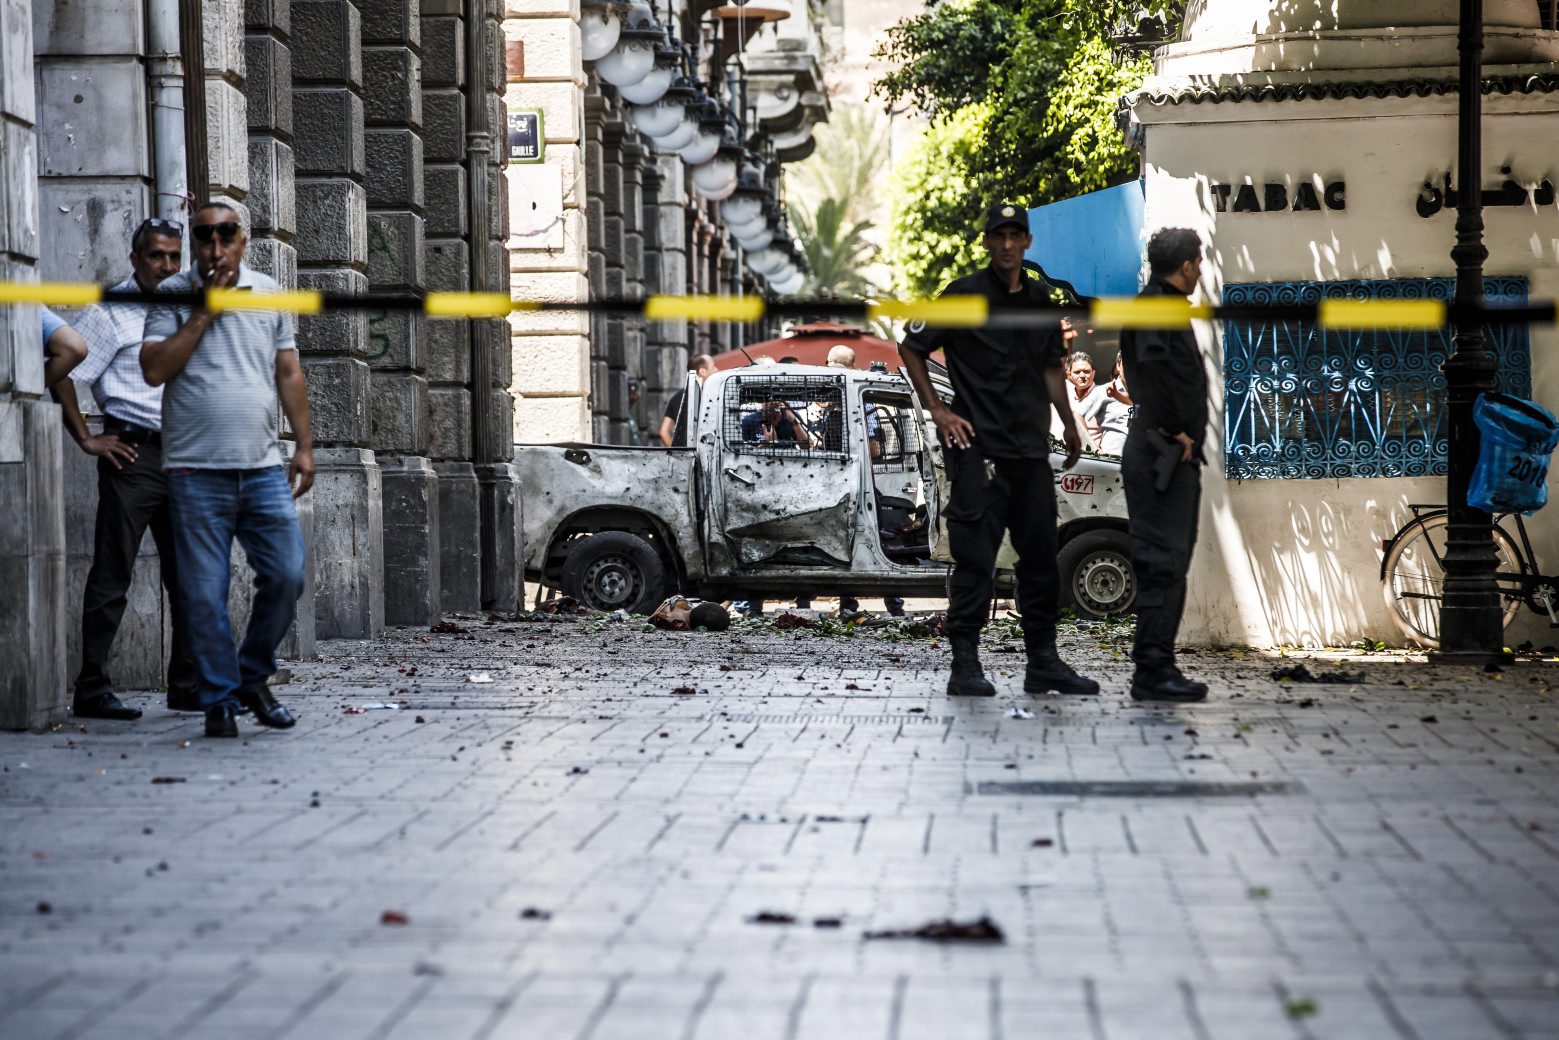 epa07677022 Police take measures at the scene after a suicide bombing targeted a police vehicle in the Tunisian capital in Tunis on 27 June  2019. according to media reports, two suicide bomb attacks near the French embassy and in the main street in the city of Tunis targeted a police patrol cars, both area's close to the shopping center, which was targeted by a female suicide bomber last October 2018. At least 2 people killed and multiple others injured.  EPA/STR TUNISIA SUICIDE BOMBING